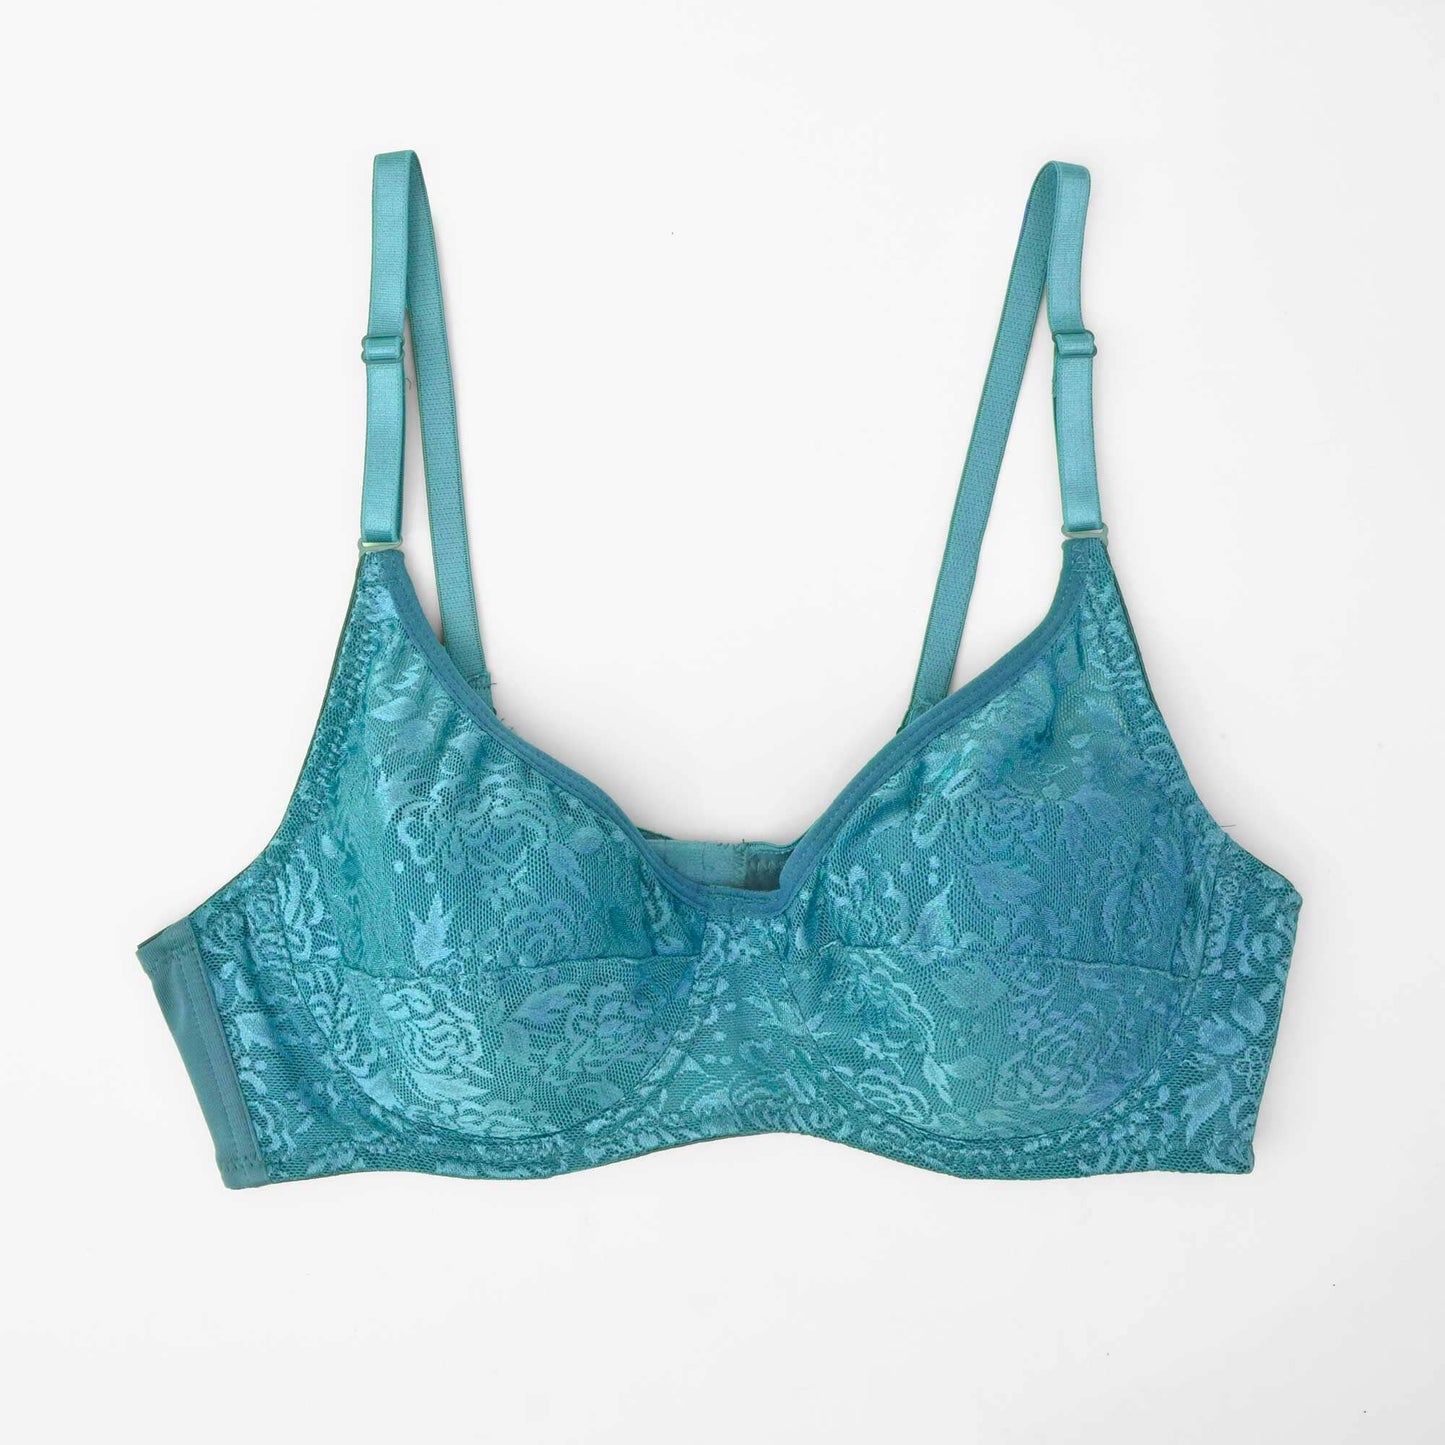 Women's Floral Lace Classic Wired Petite Bra Women's Lingerie SRL Teal 32 